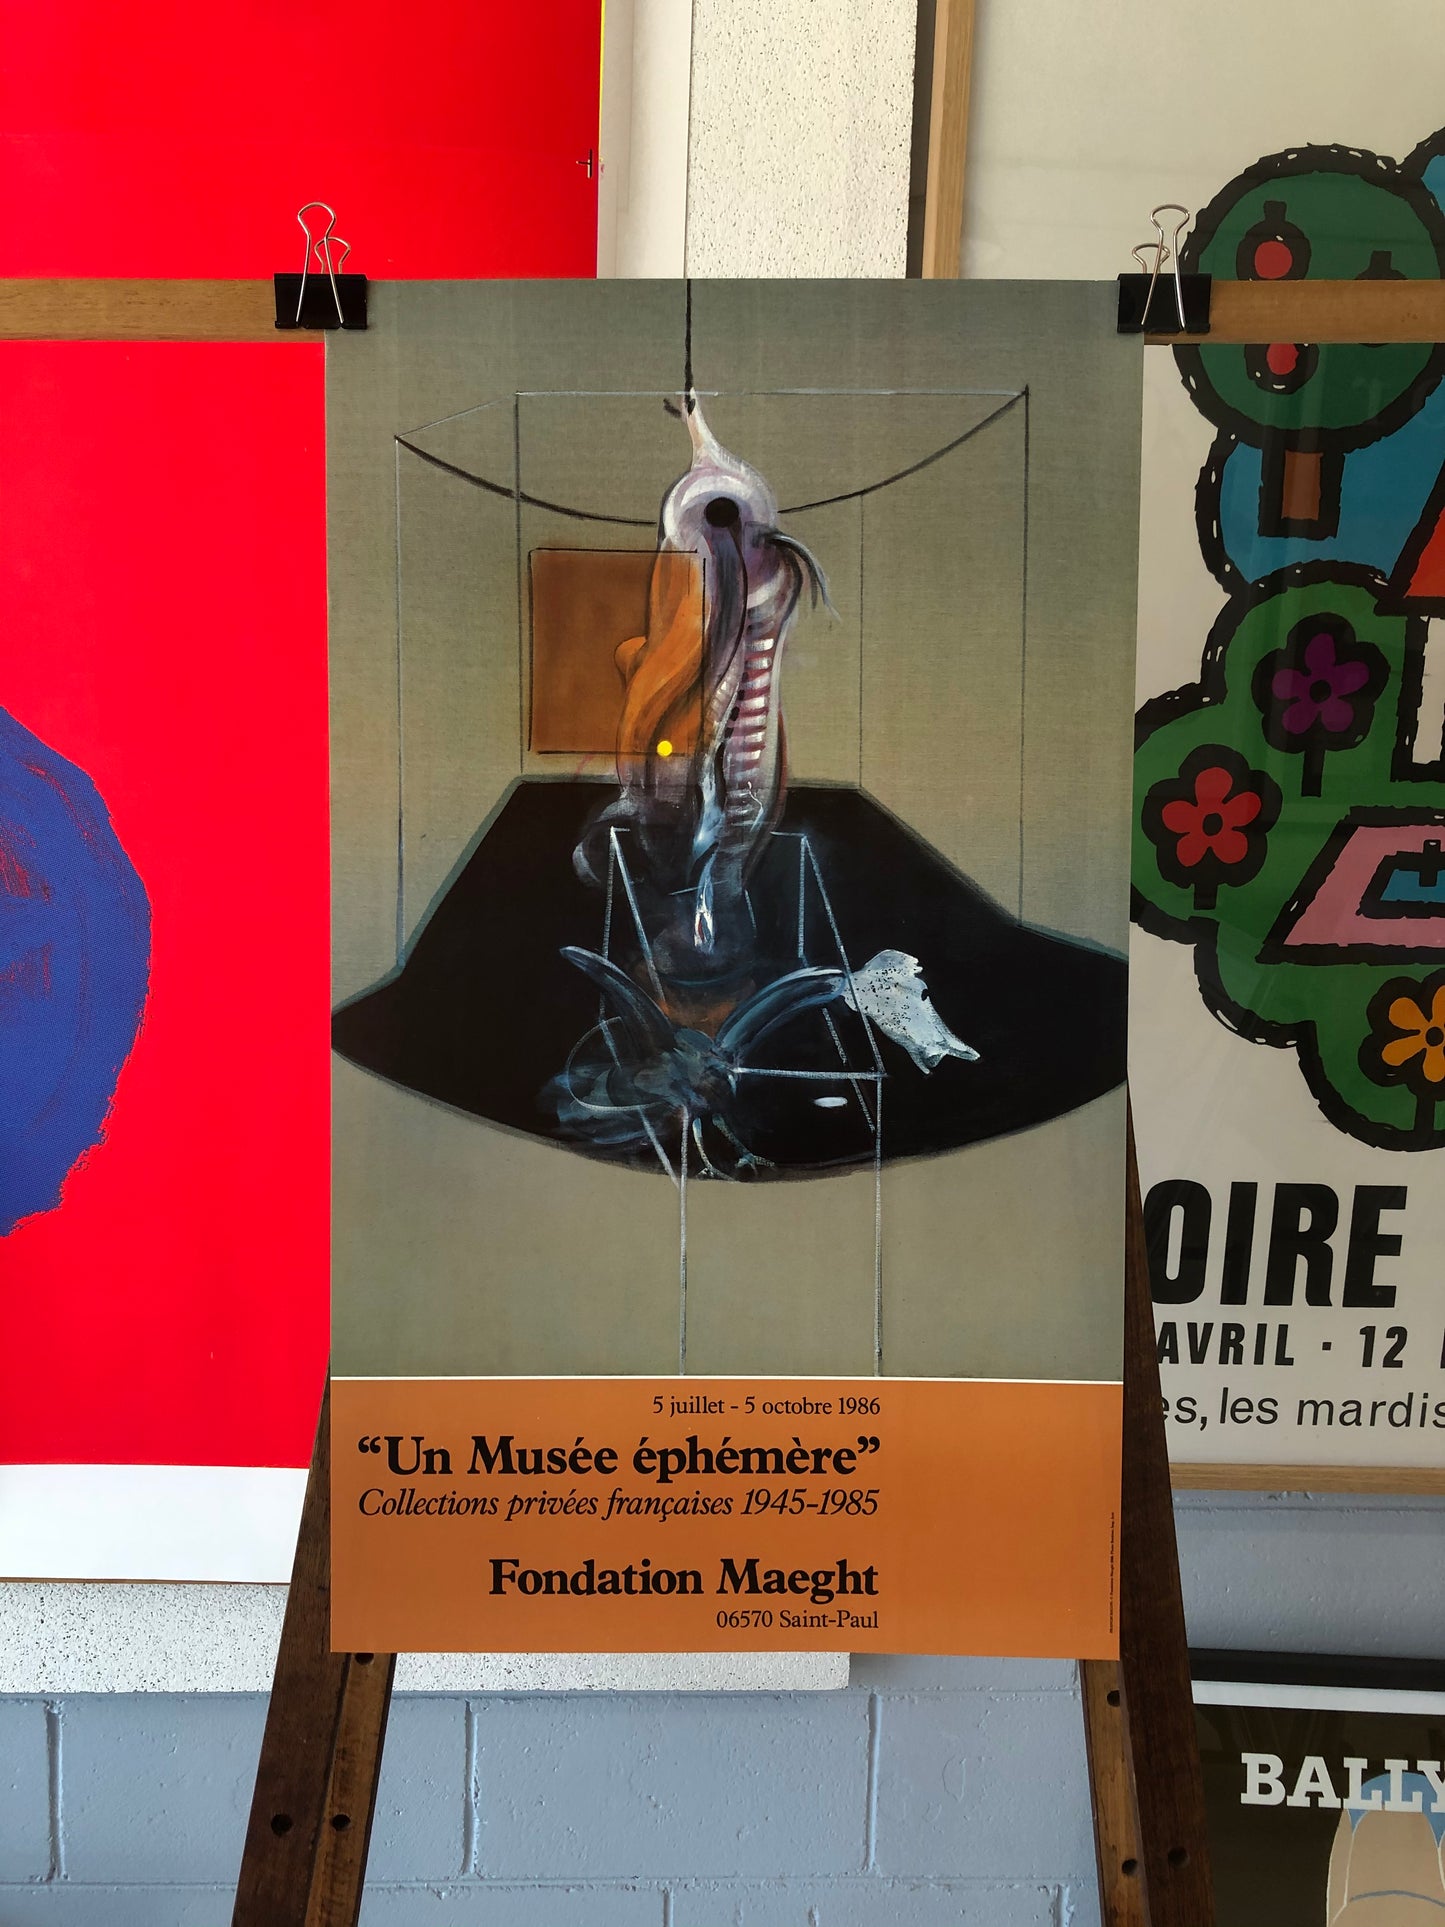 Francis Bacon Exhibition Poster, Galerie Maeght